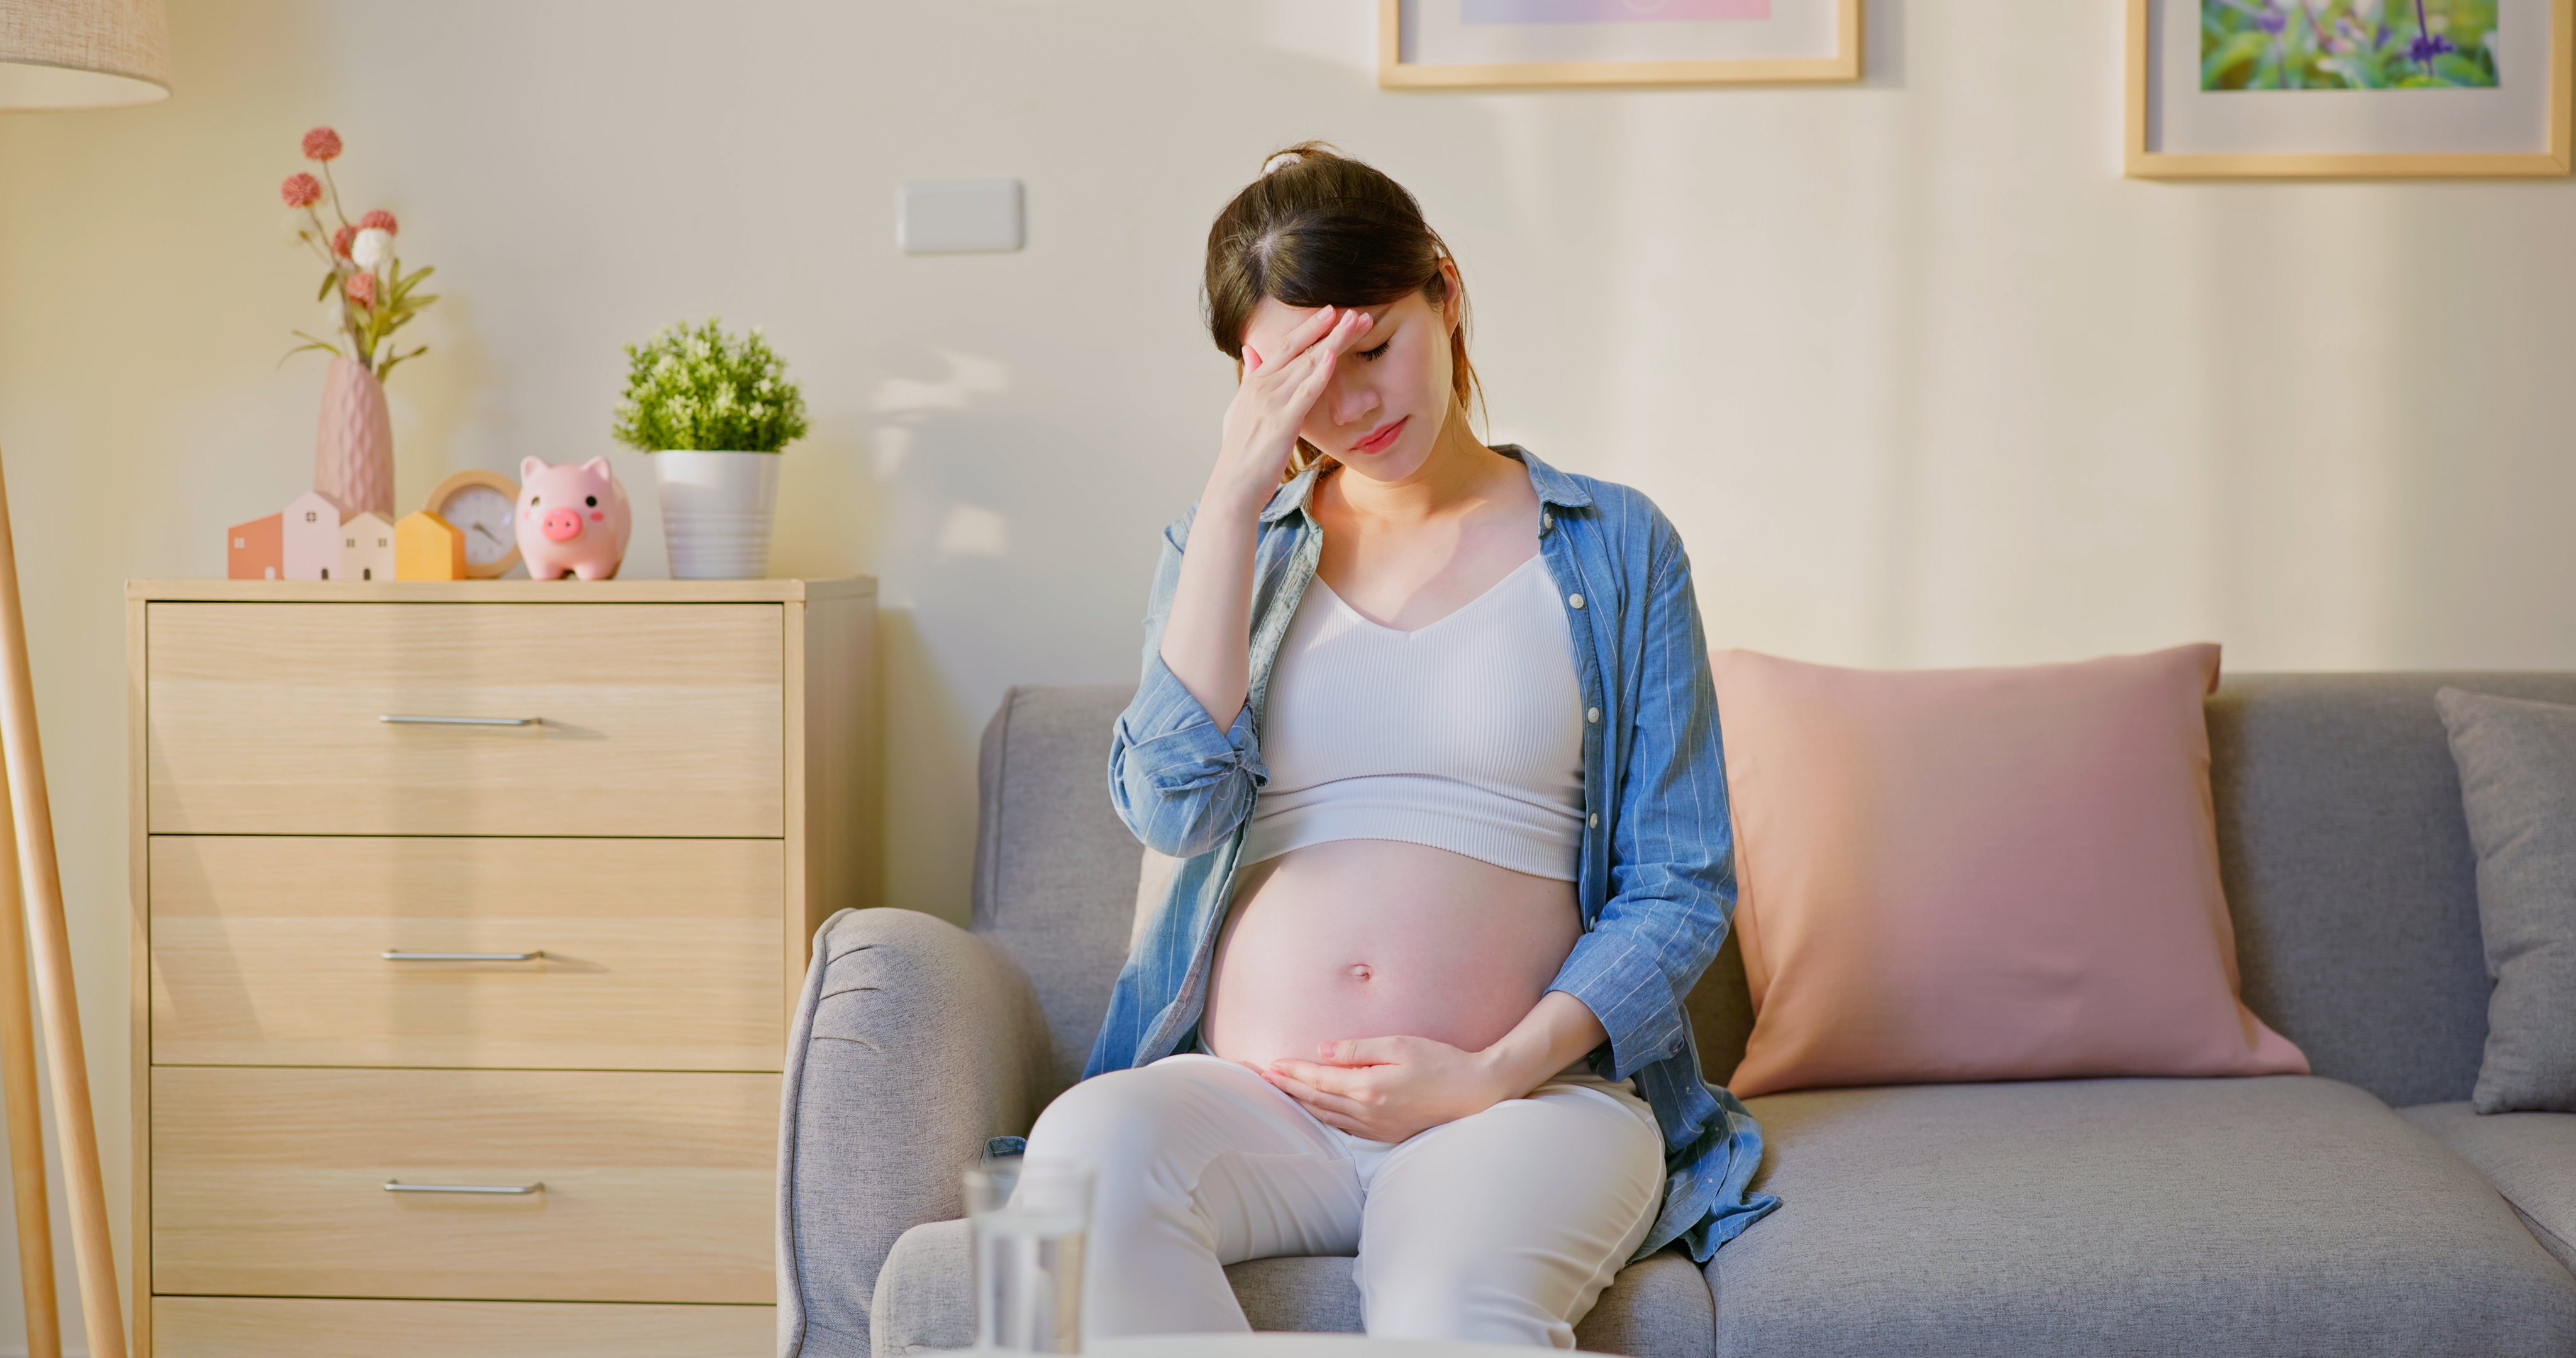 A pregnant woman sitting on a couch with her hand on her forehead | Source: Shutterstock